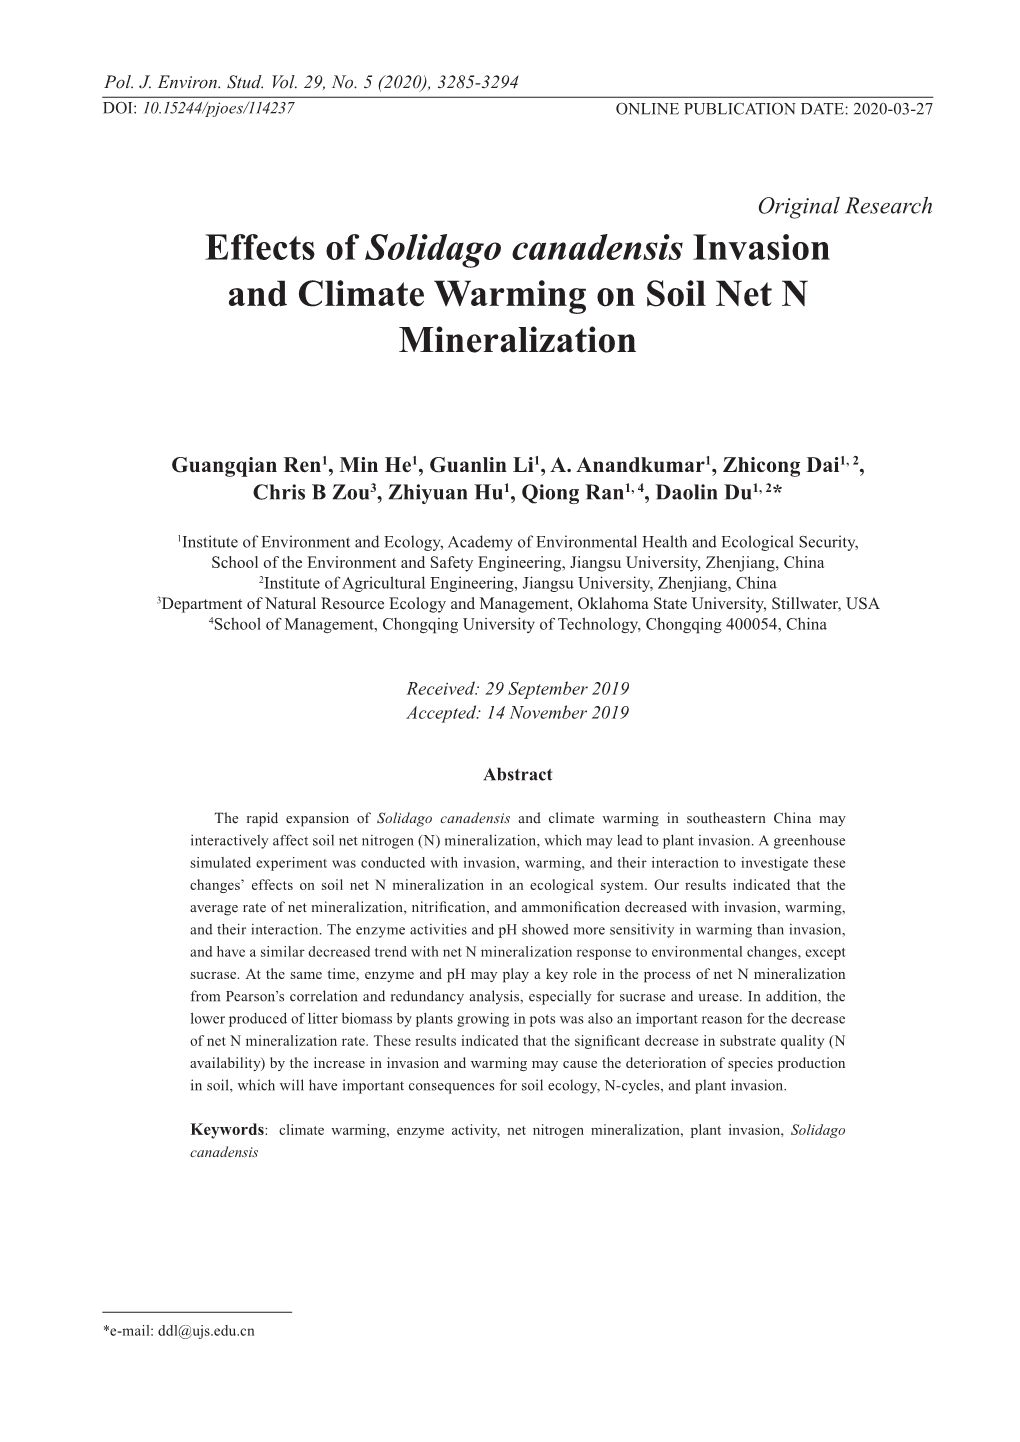 Effects of Solidago Canadensis Invasion and Climate Warming on Soil Net N Mineralization